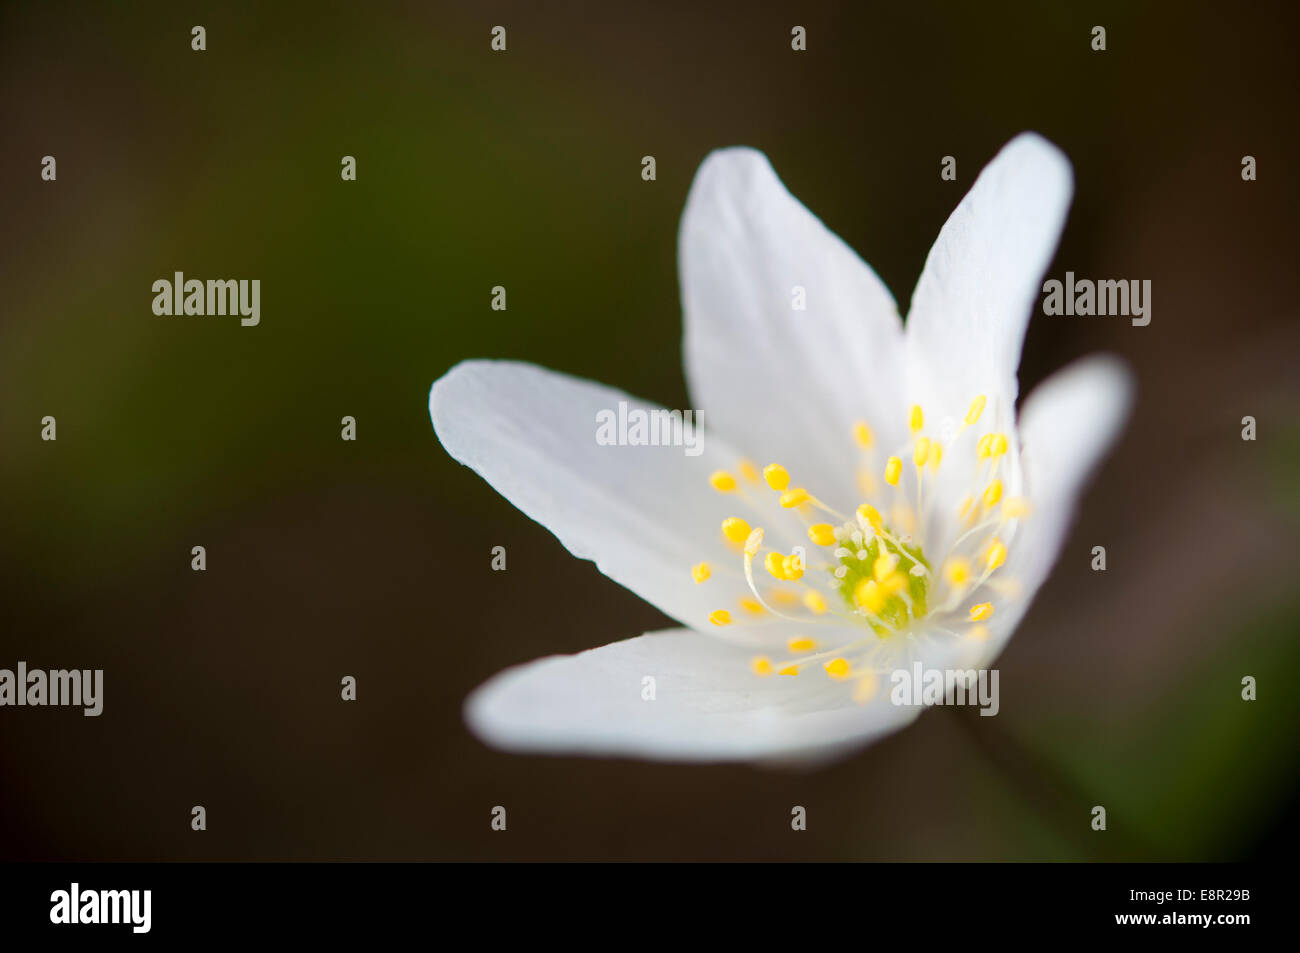 Wood Anemone (Anemone Sylvestris). A simple spring white flower in close up showing yellow stamens. Stock Photo